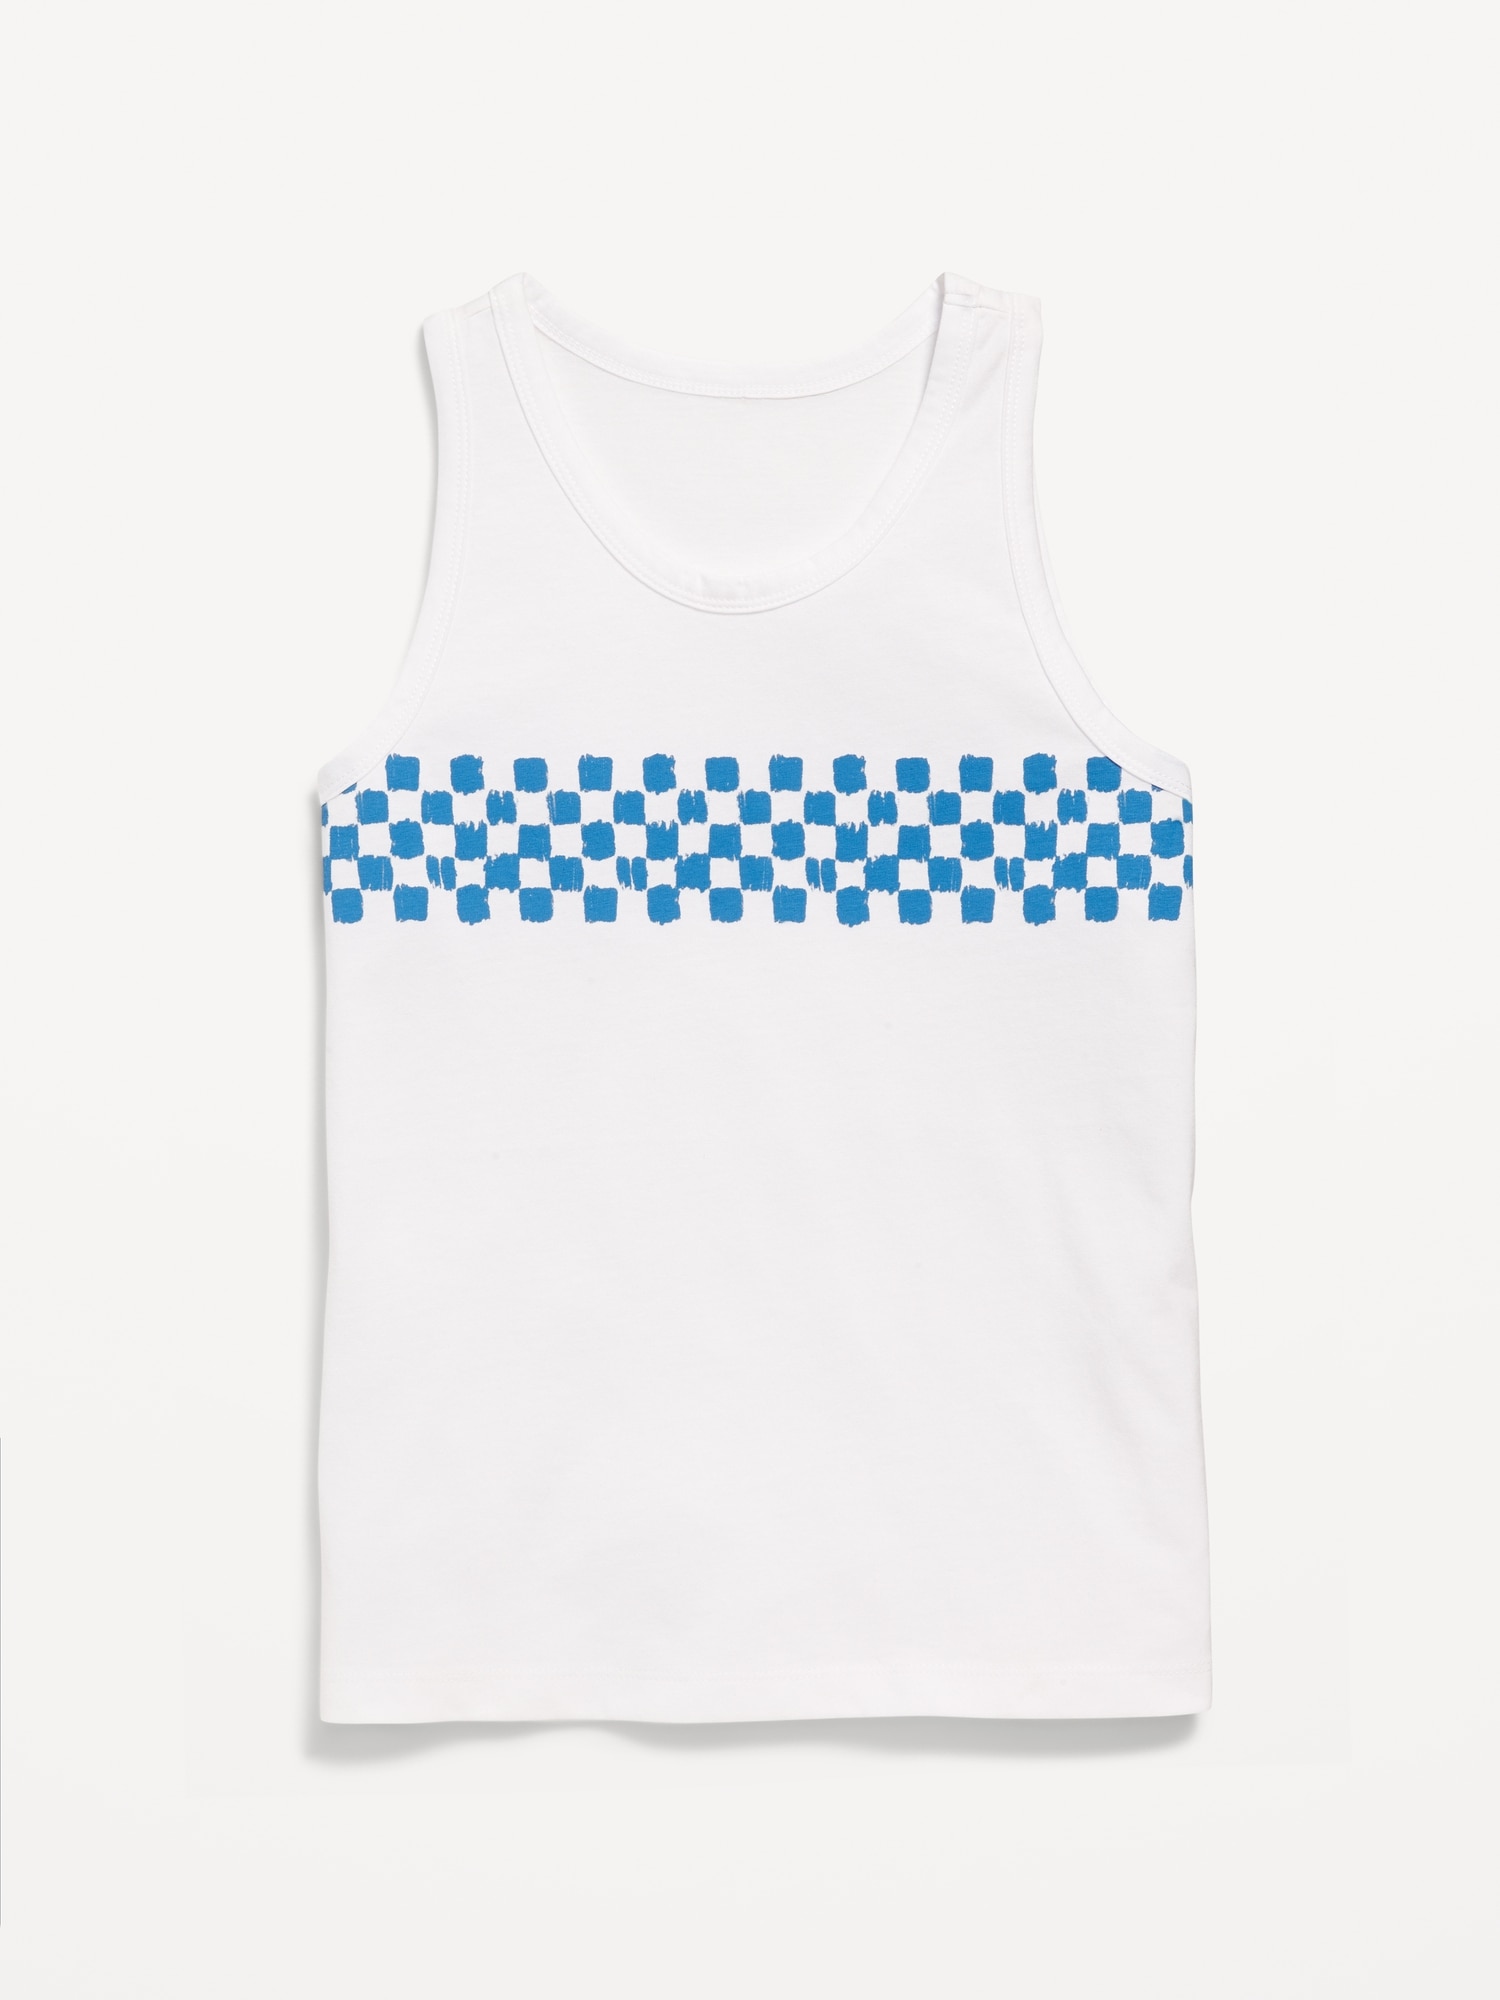 Printed Softest Tank Top for Boys